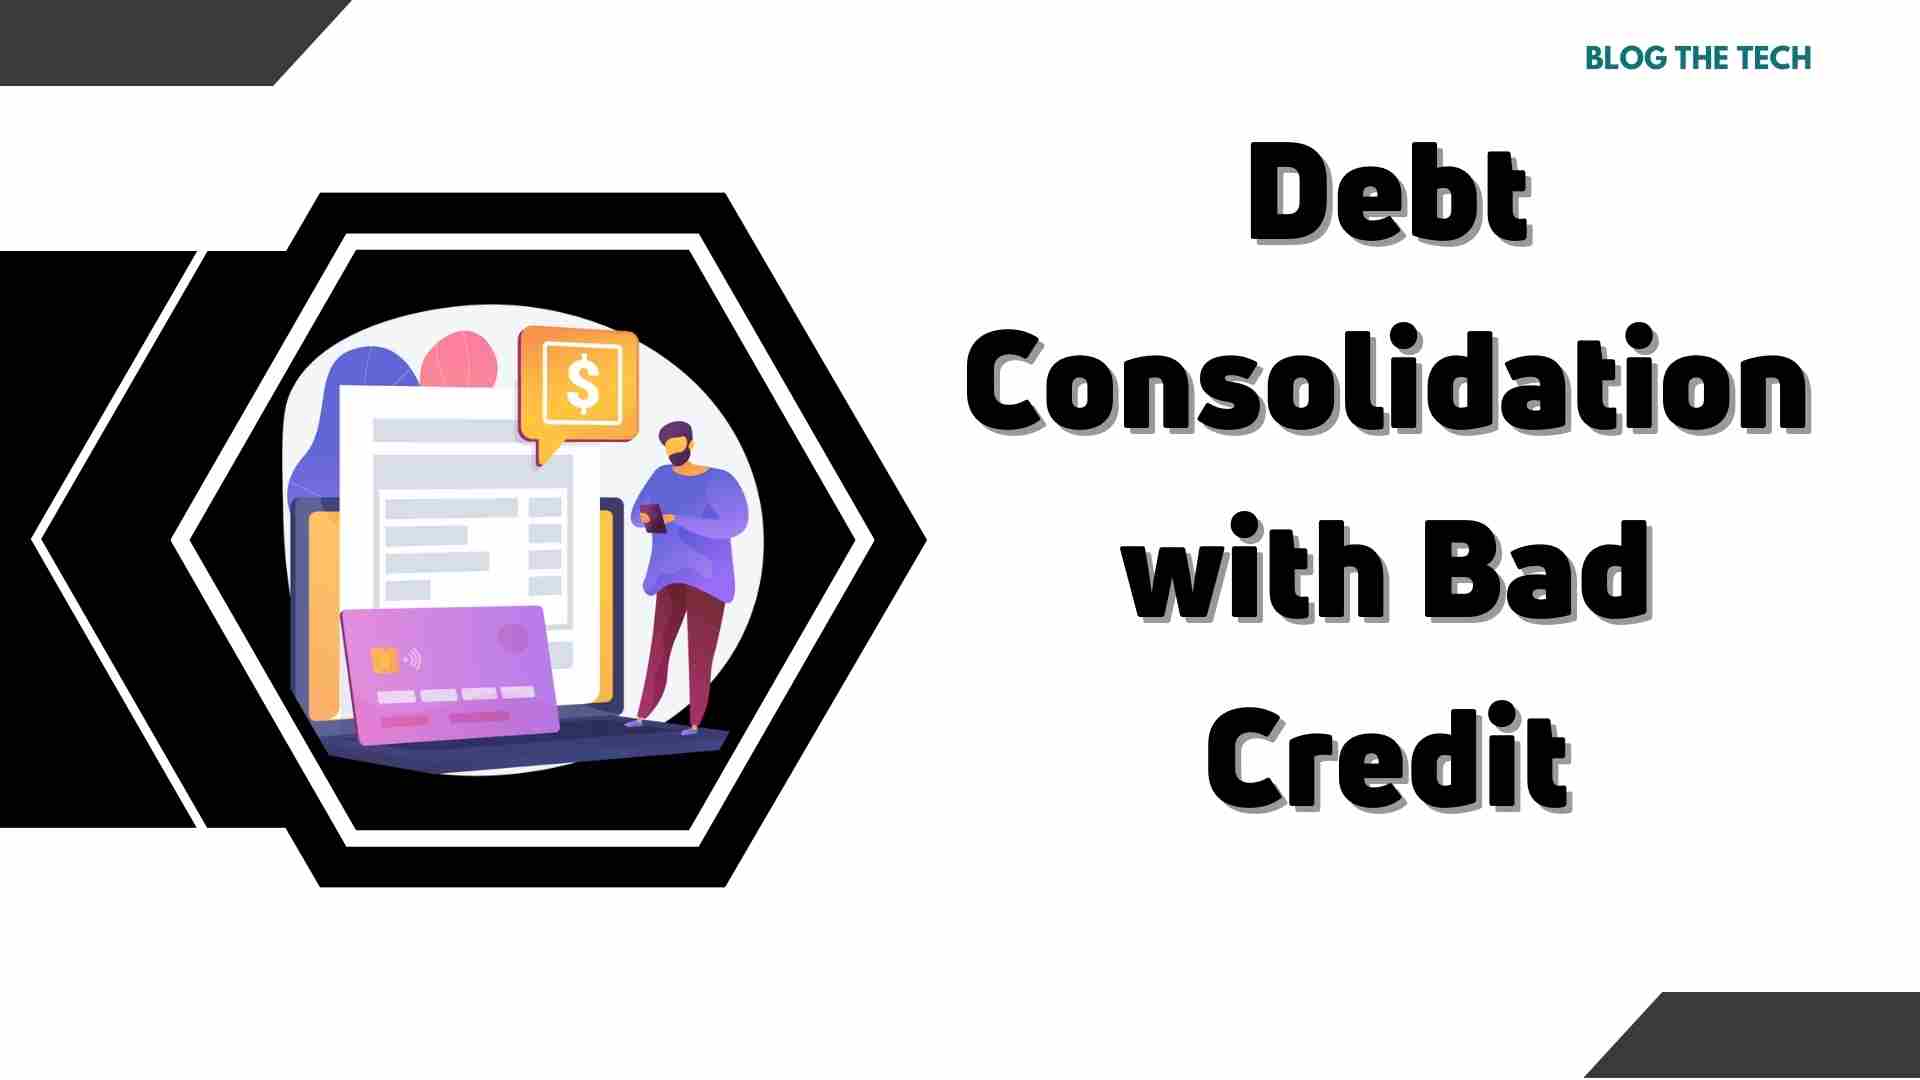 Debt Consolidation with Bad Credit